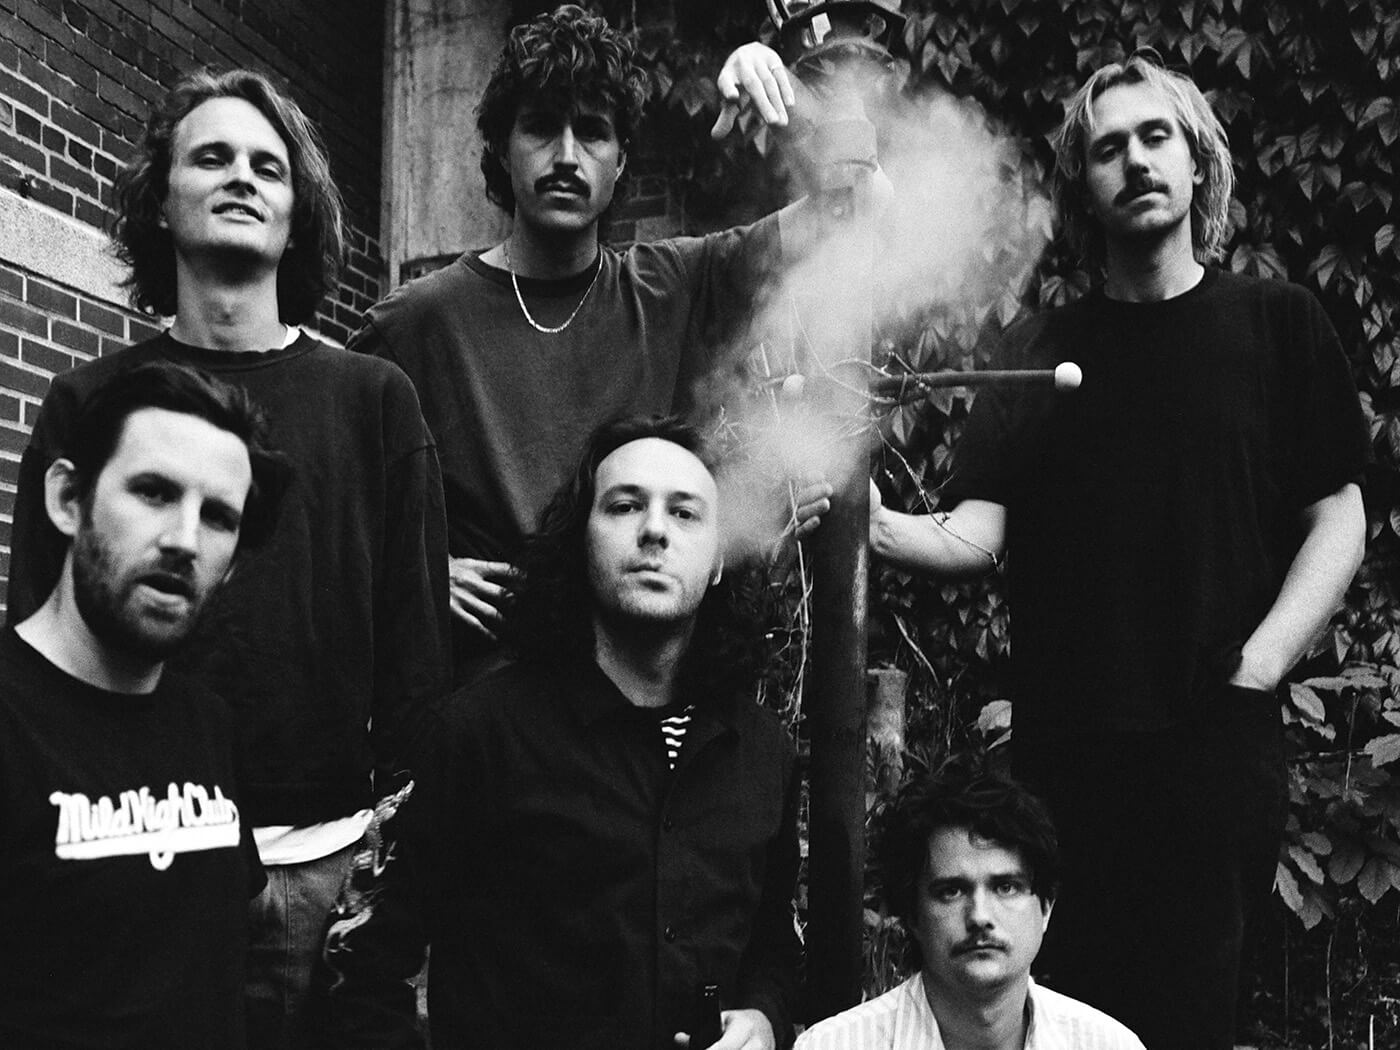 King Gizzard and The Lizard Wizzard